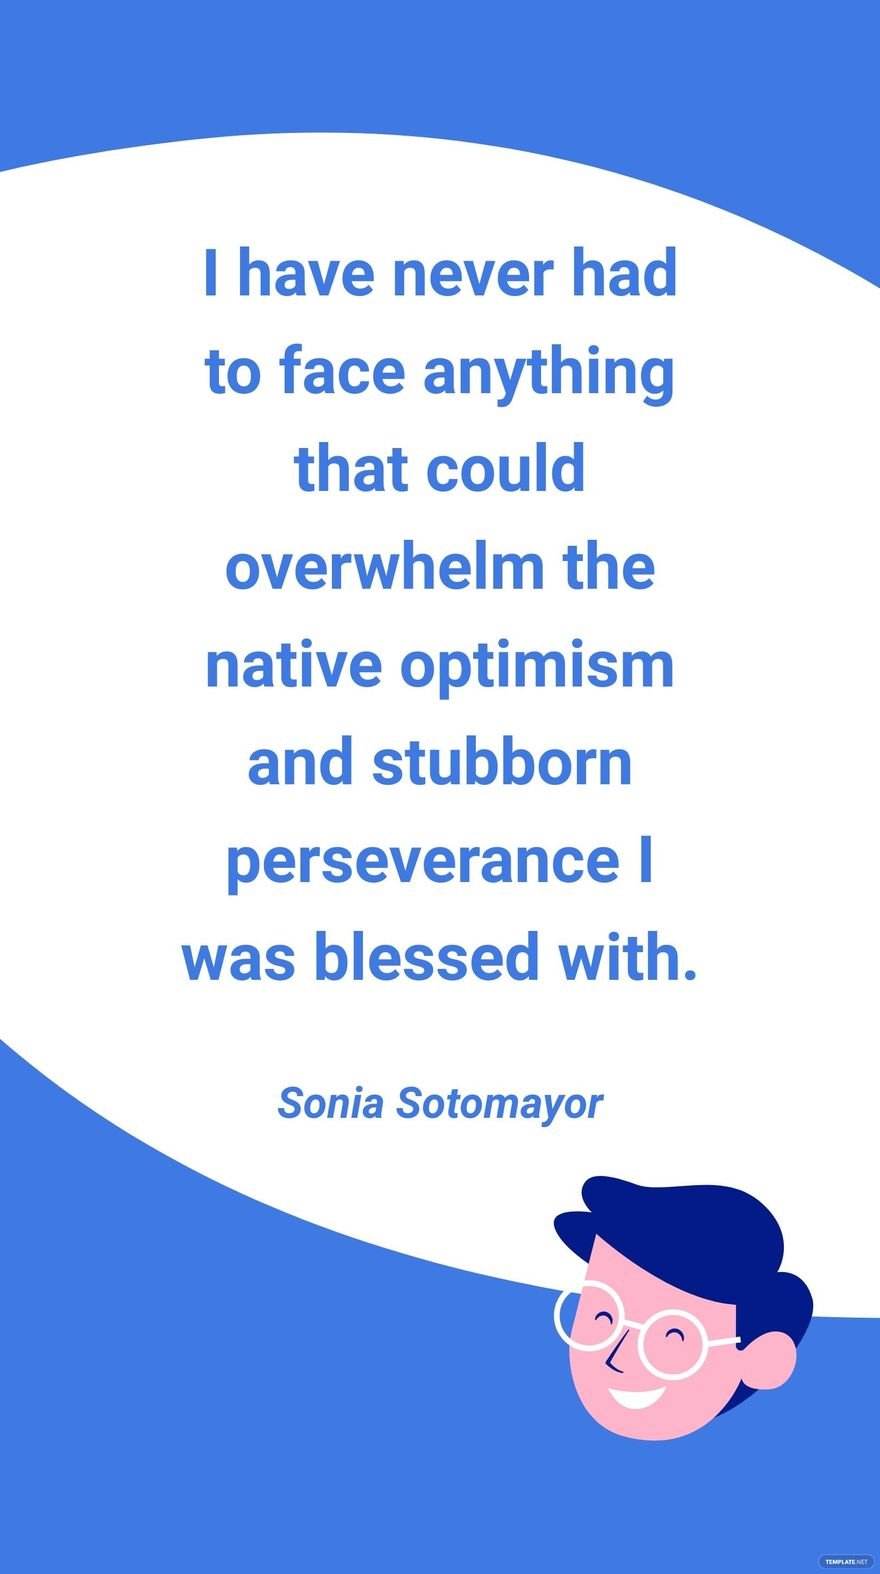 Sonia Sotomayor - I have never had to face anything that could overwhelm the native optimism and stubborn perseverance I was blessed with.